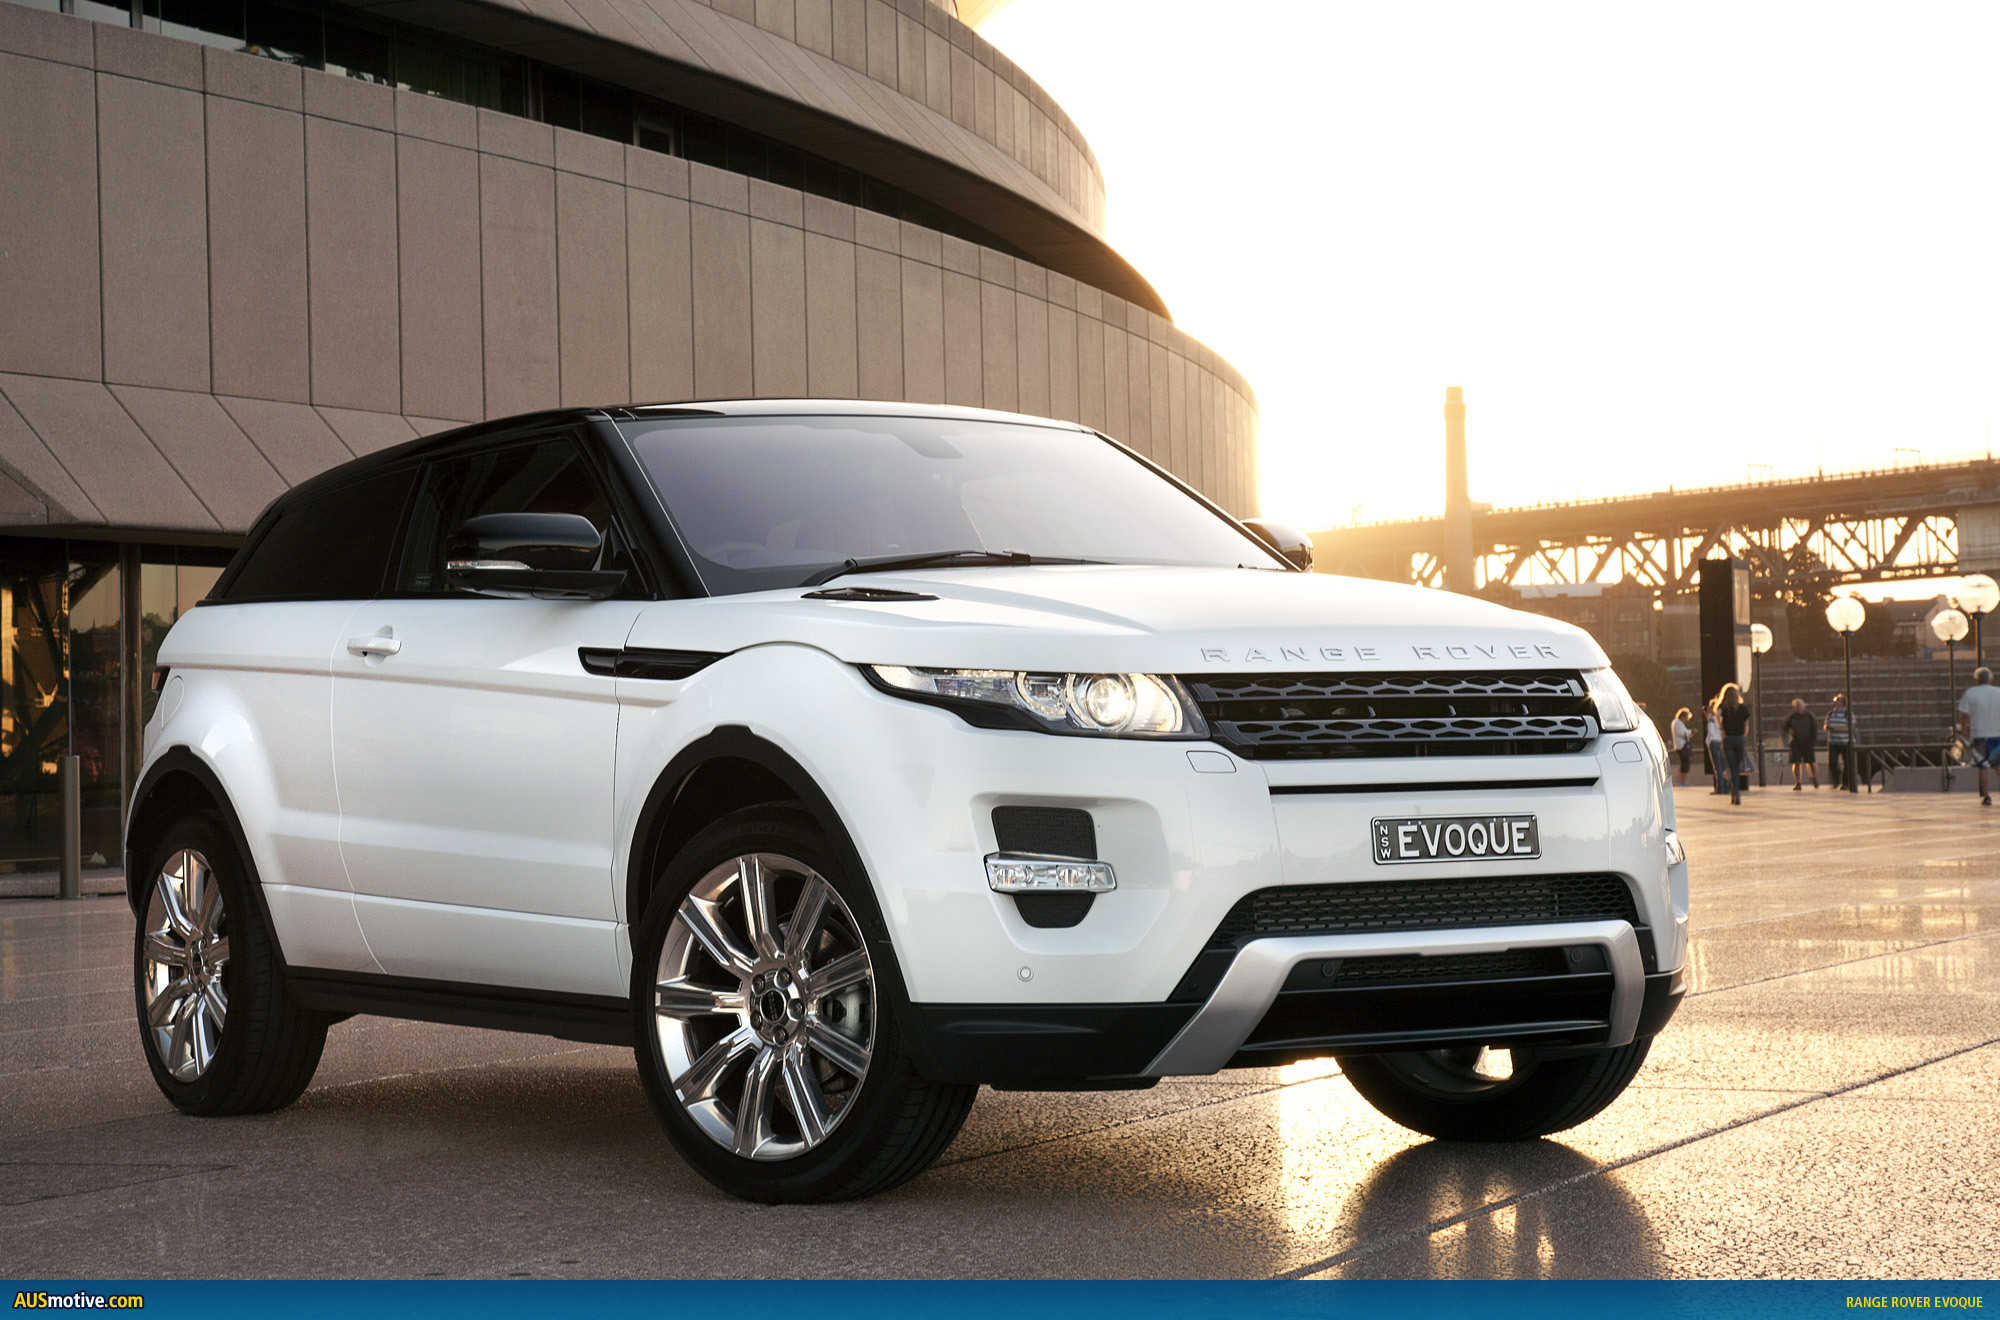 Land Rover Range Rover Evoque 2.2 TD4 2WD AT Dynamic